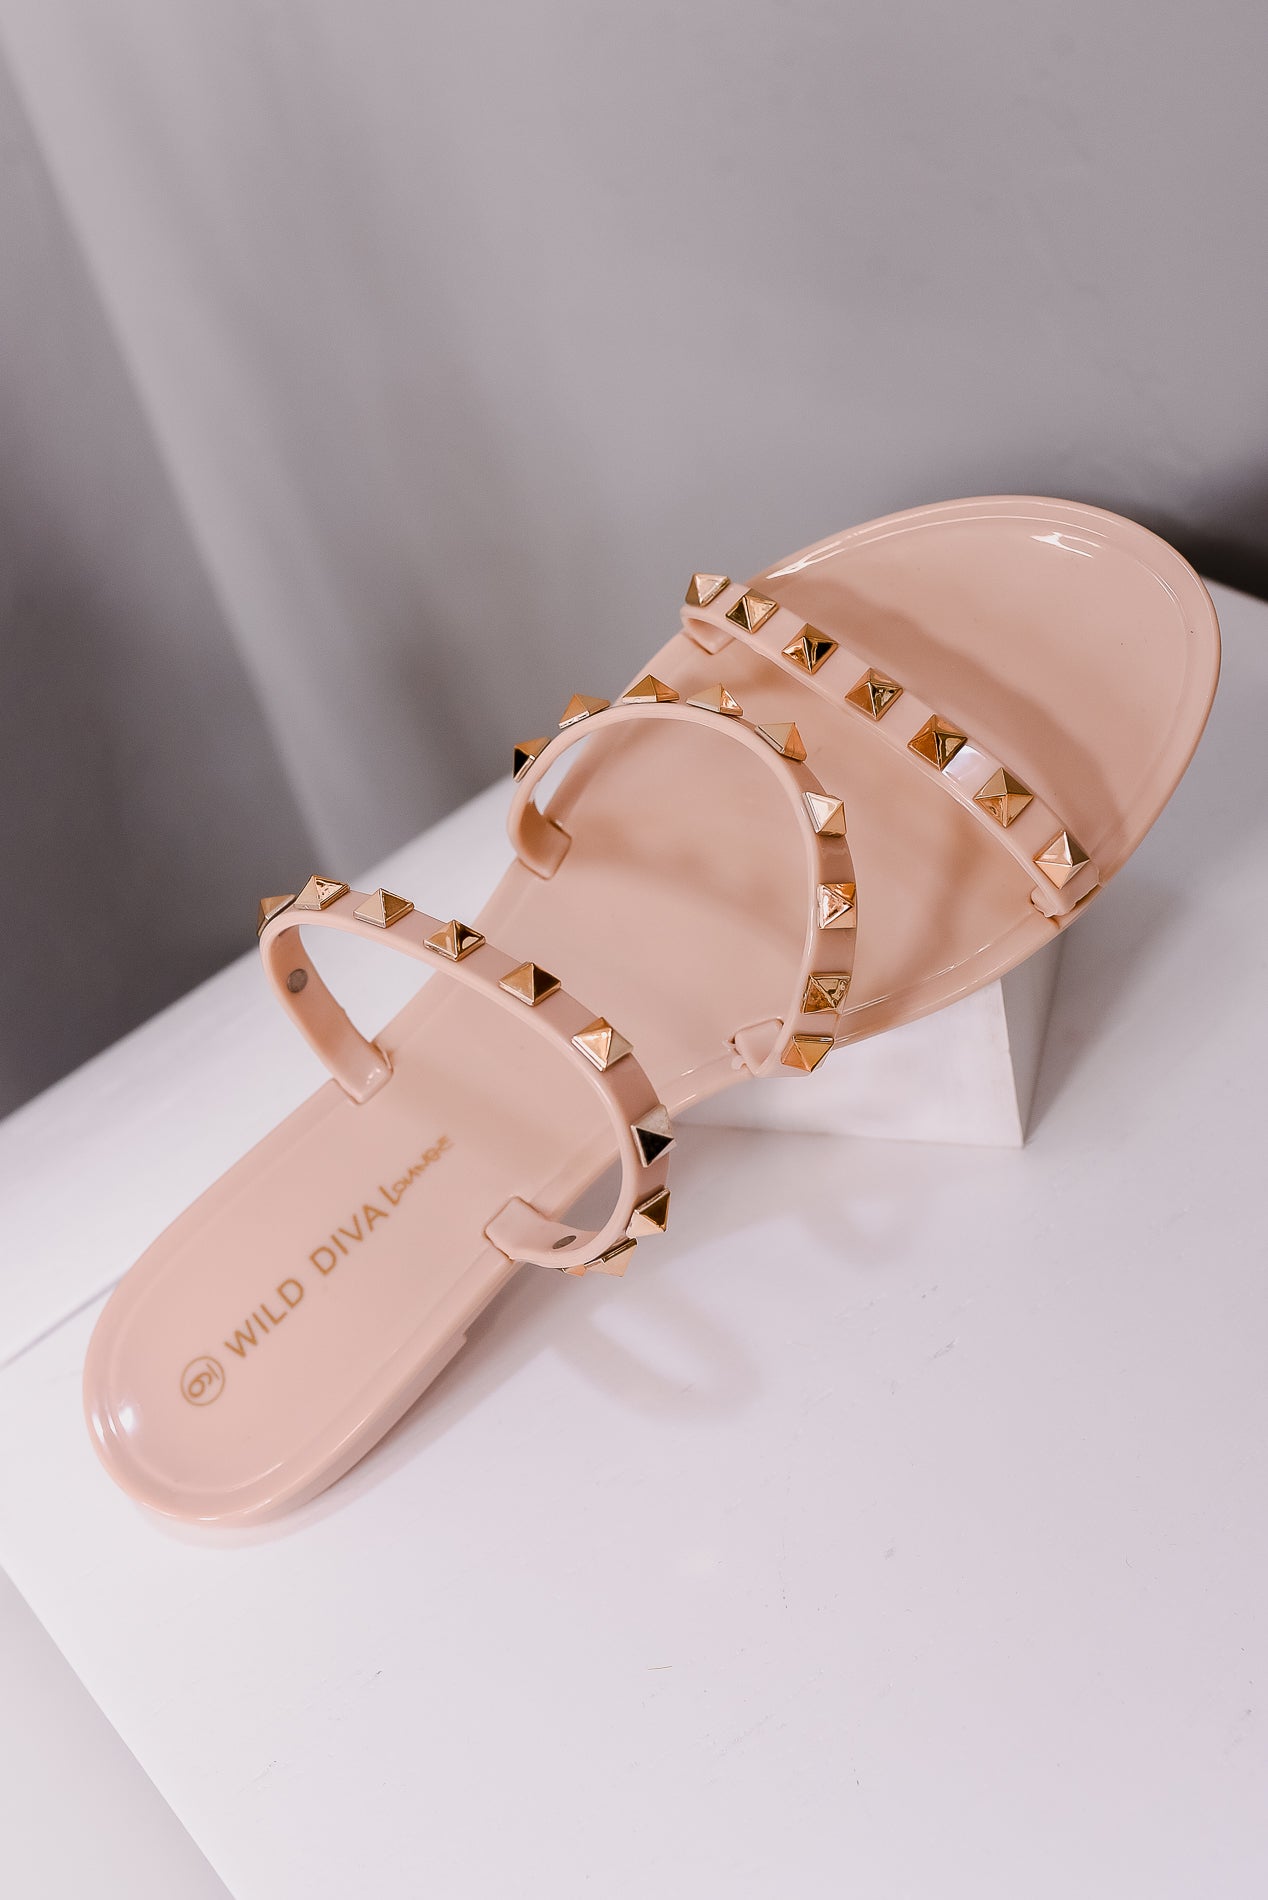 Rose gold Louis Vuitton shoes for Sale in Snover, MI - OfferUp